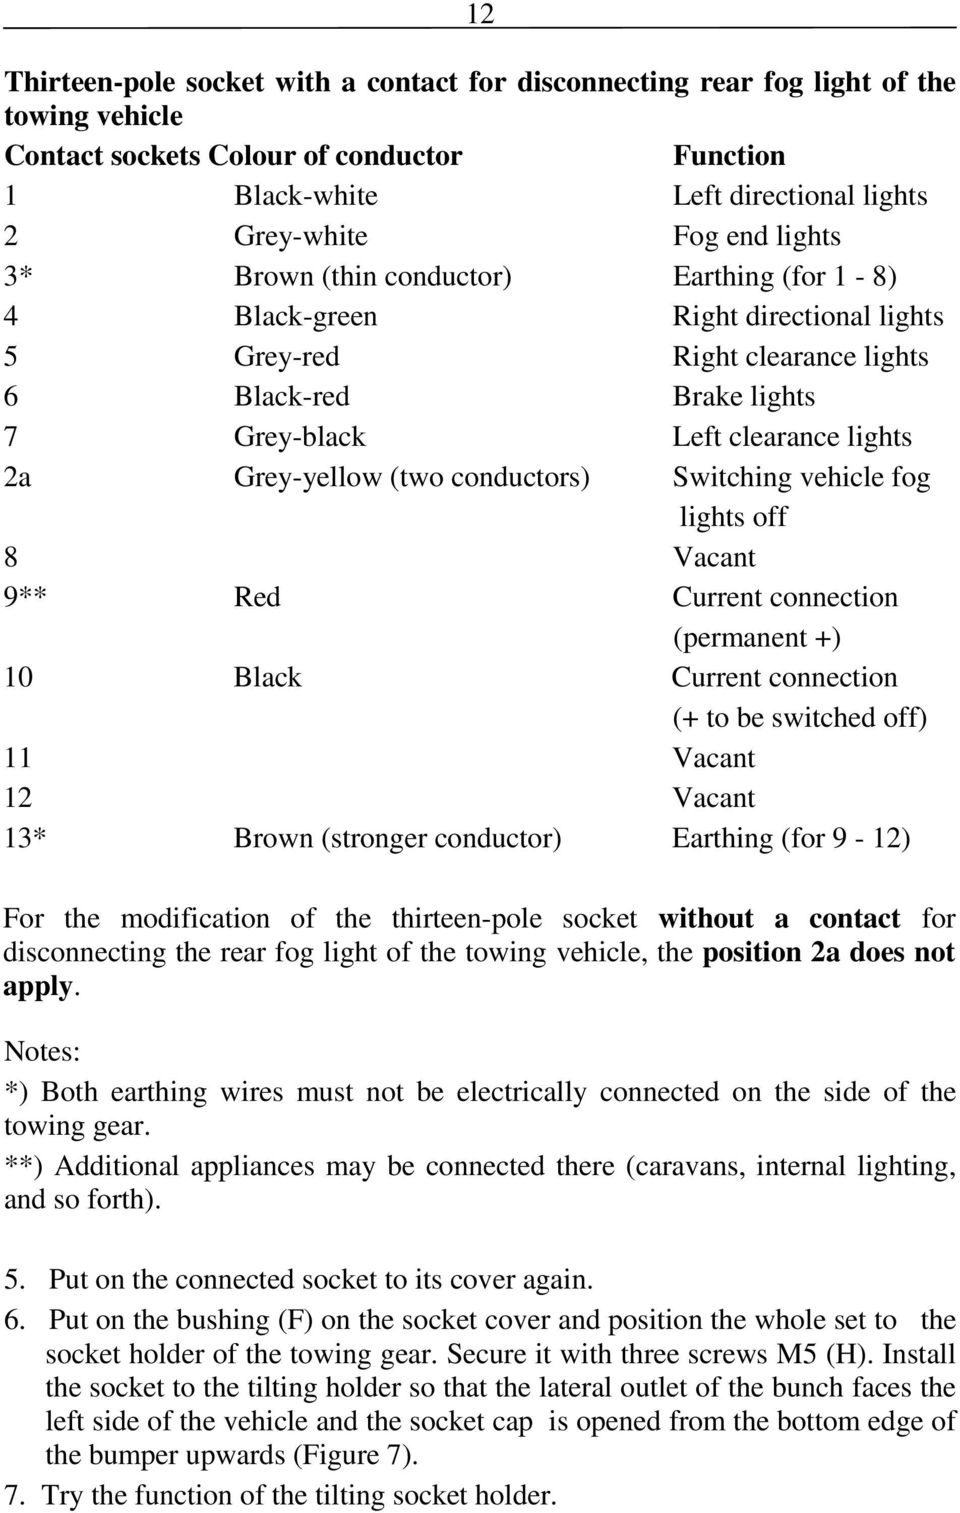 (two conductors) Switching vehicle fog lights off 8 Vacant 9** Red Current connection (permanent +) 10 Black Current connection (+ to be switched off) 11 Vacant 12 Vacant 13* Brown (stronger